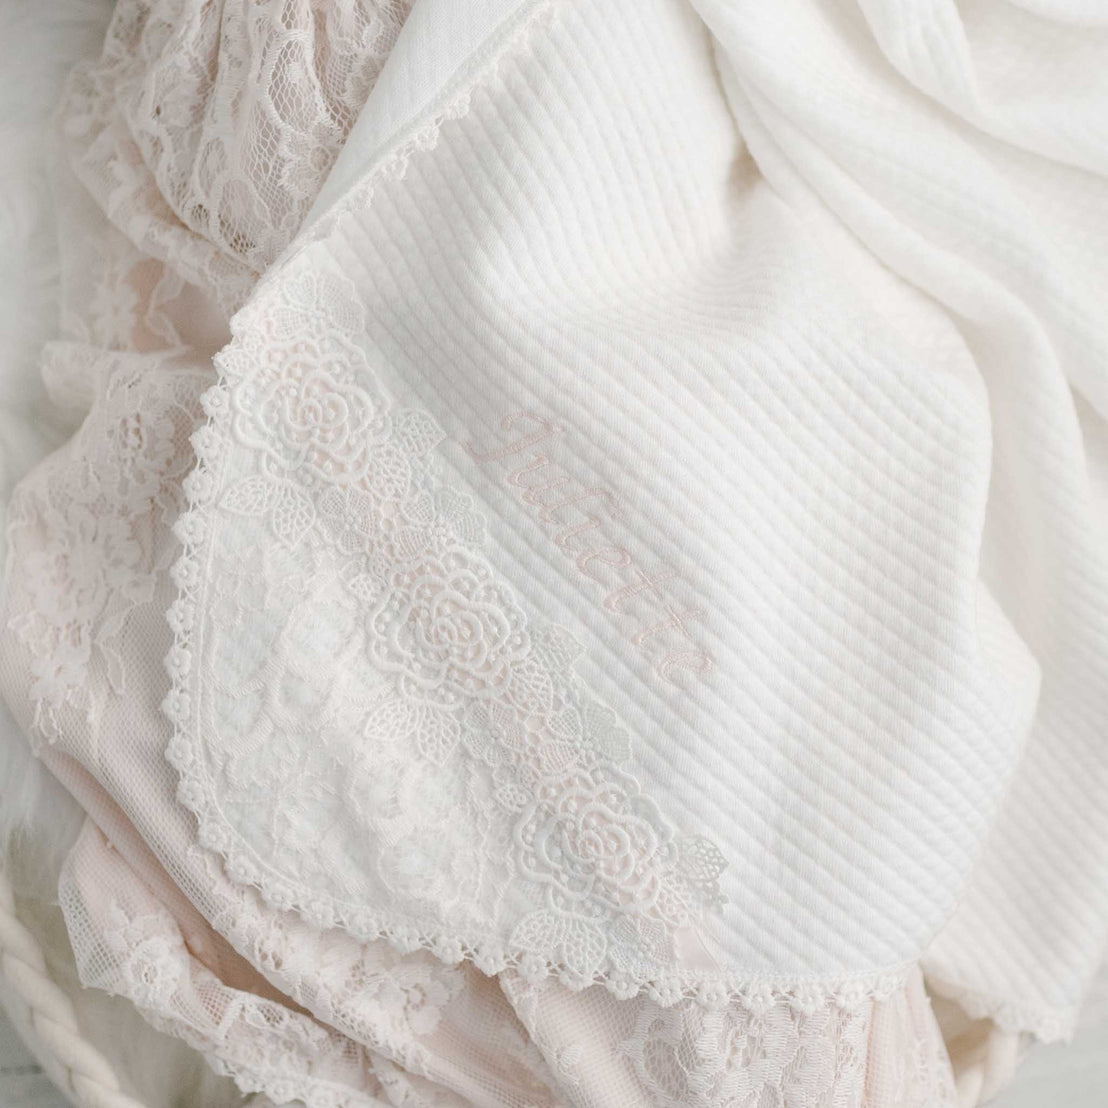 Close-up of the Juliette Blanket, an upscale, handcrafted white fabric with embroidered details and vintage lace, featuring a visible texture of soft, intricate patterns.